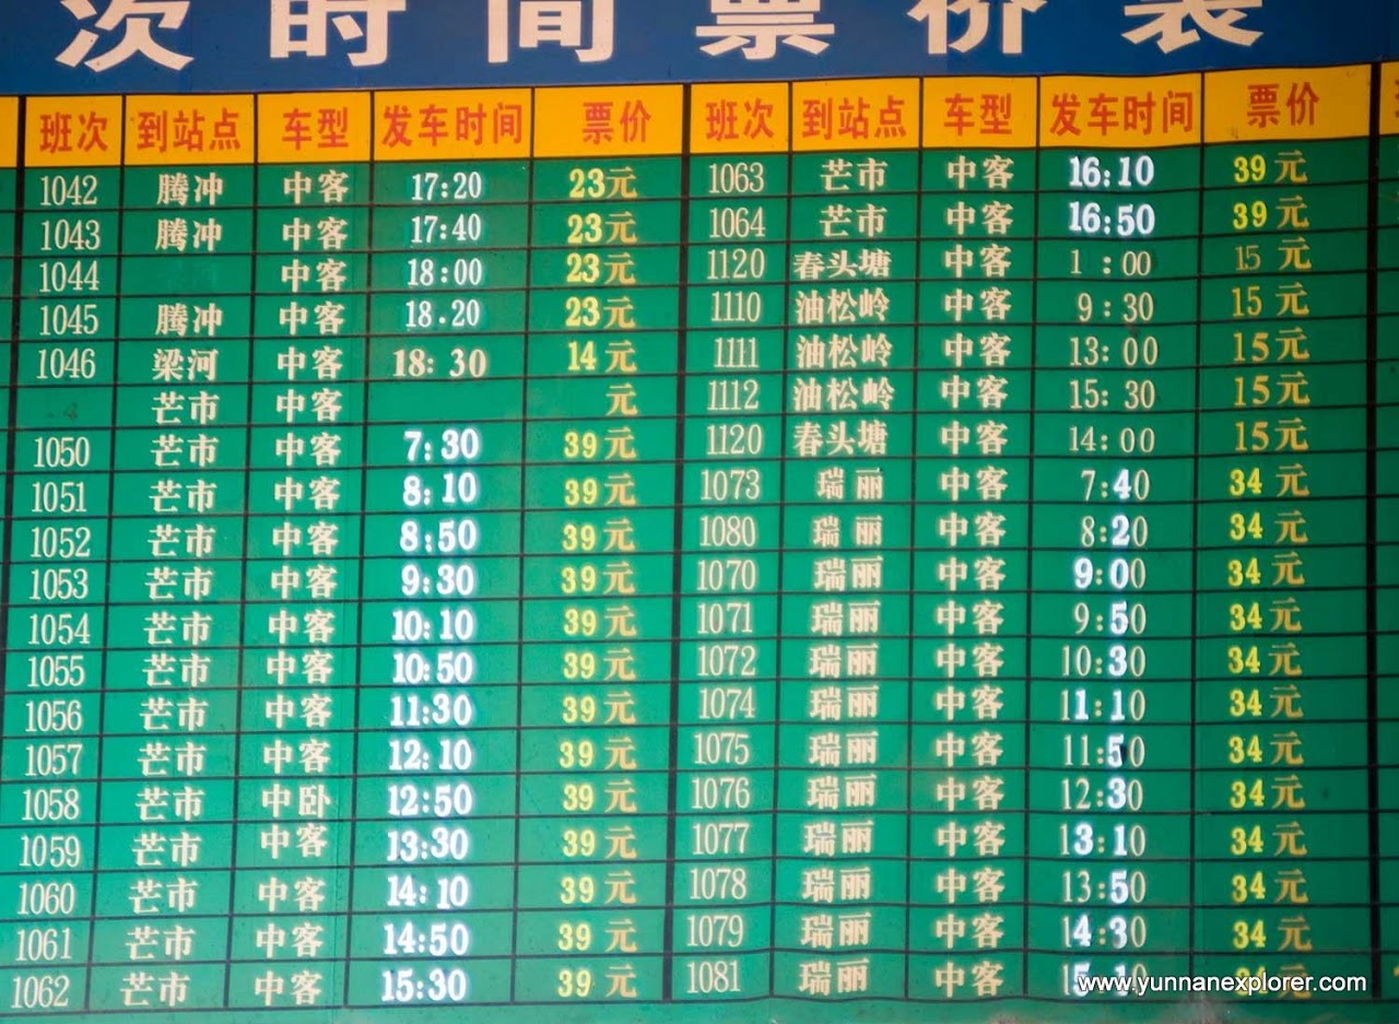 Picture: Busses to Tengchong, Lianghe, Mangshi, Ruili, Kunming and some local destinations. 